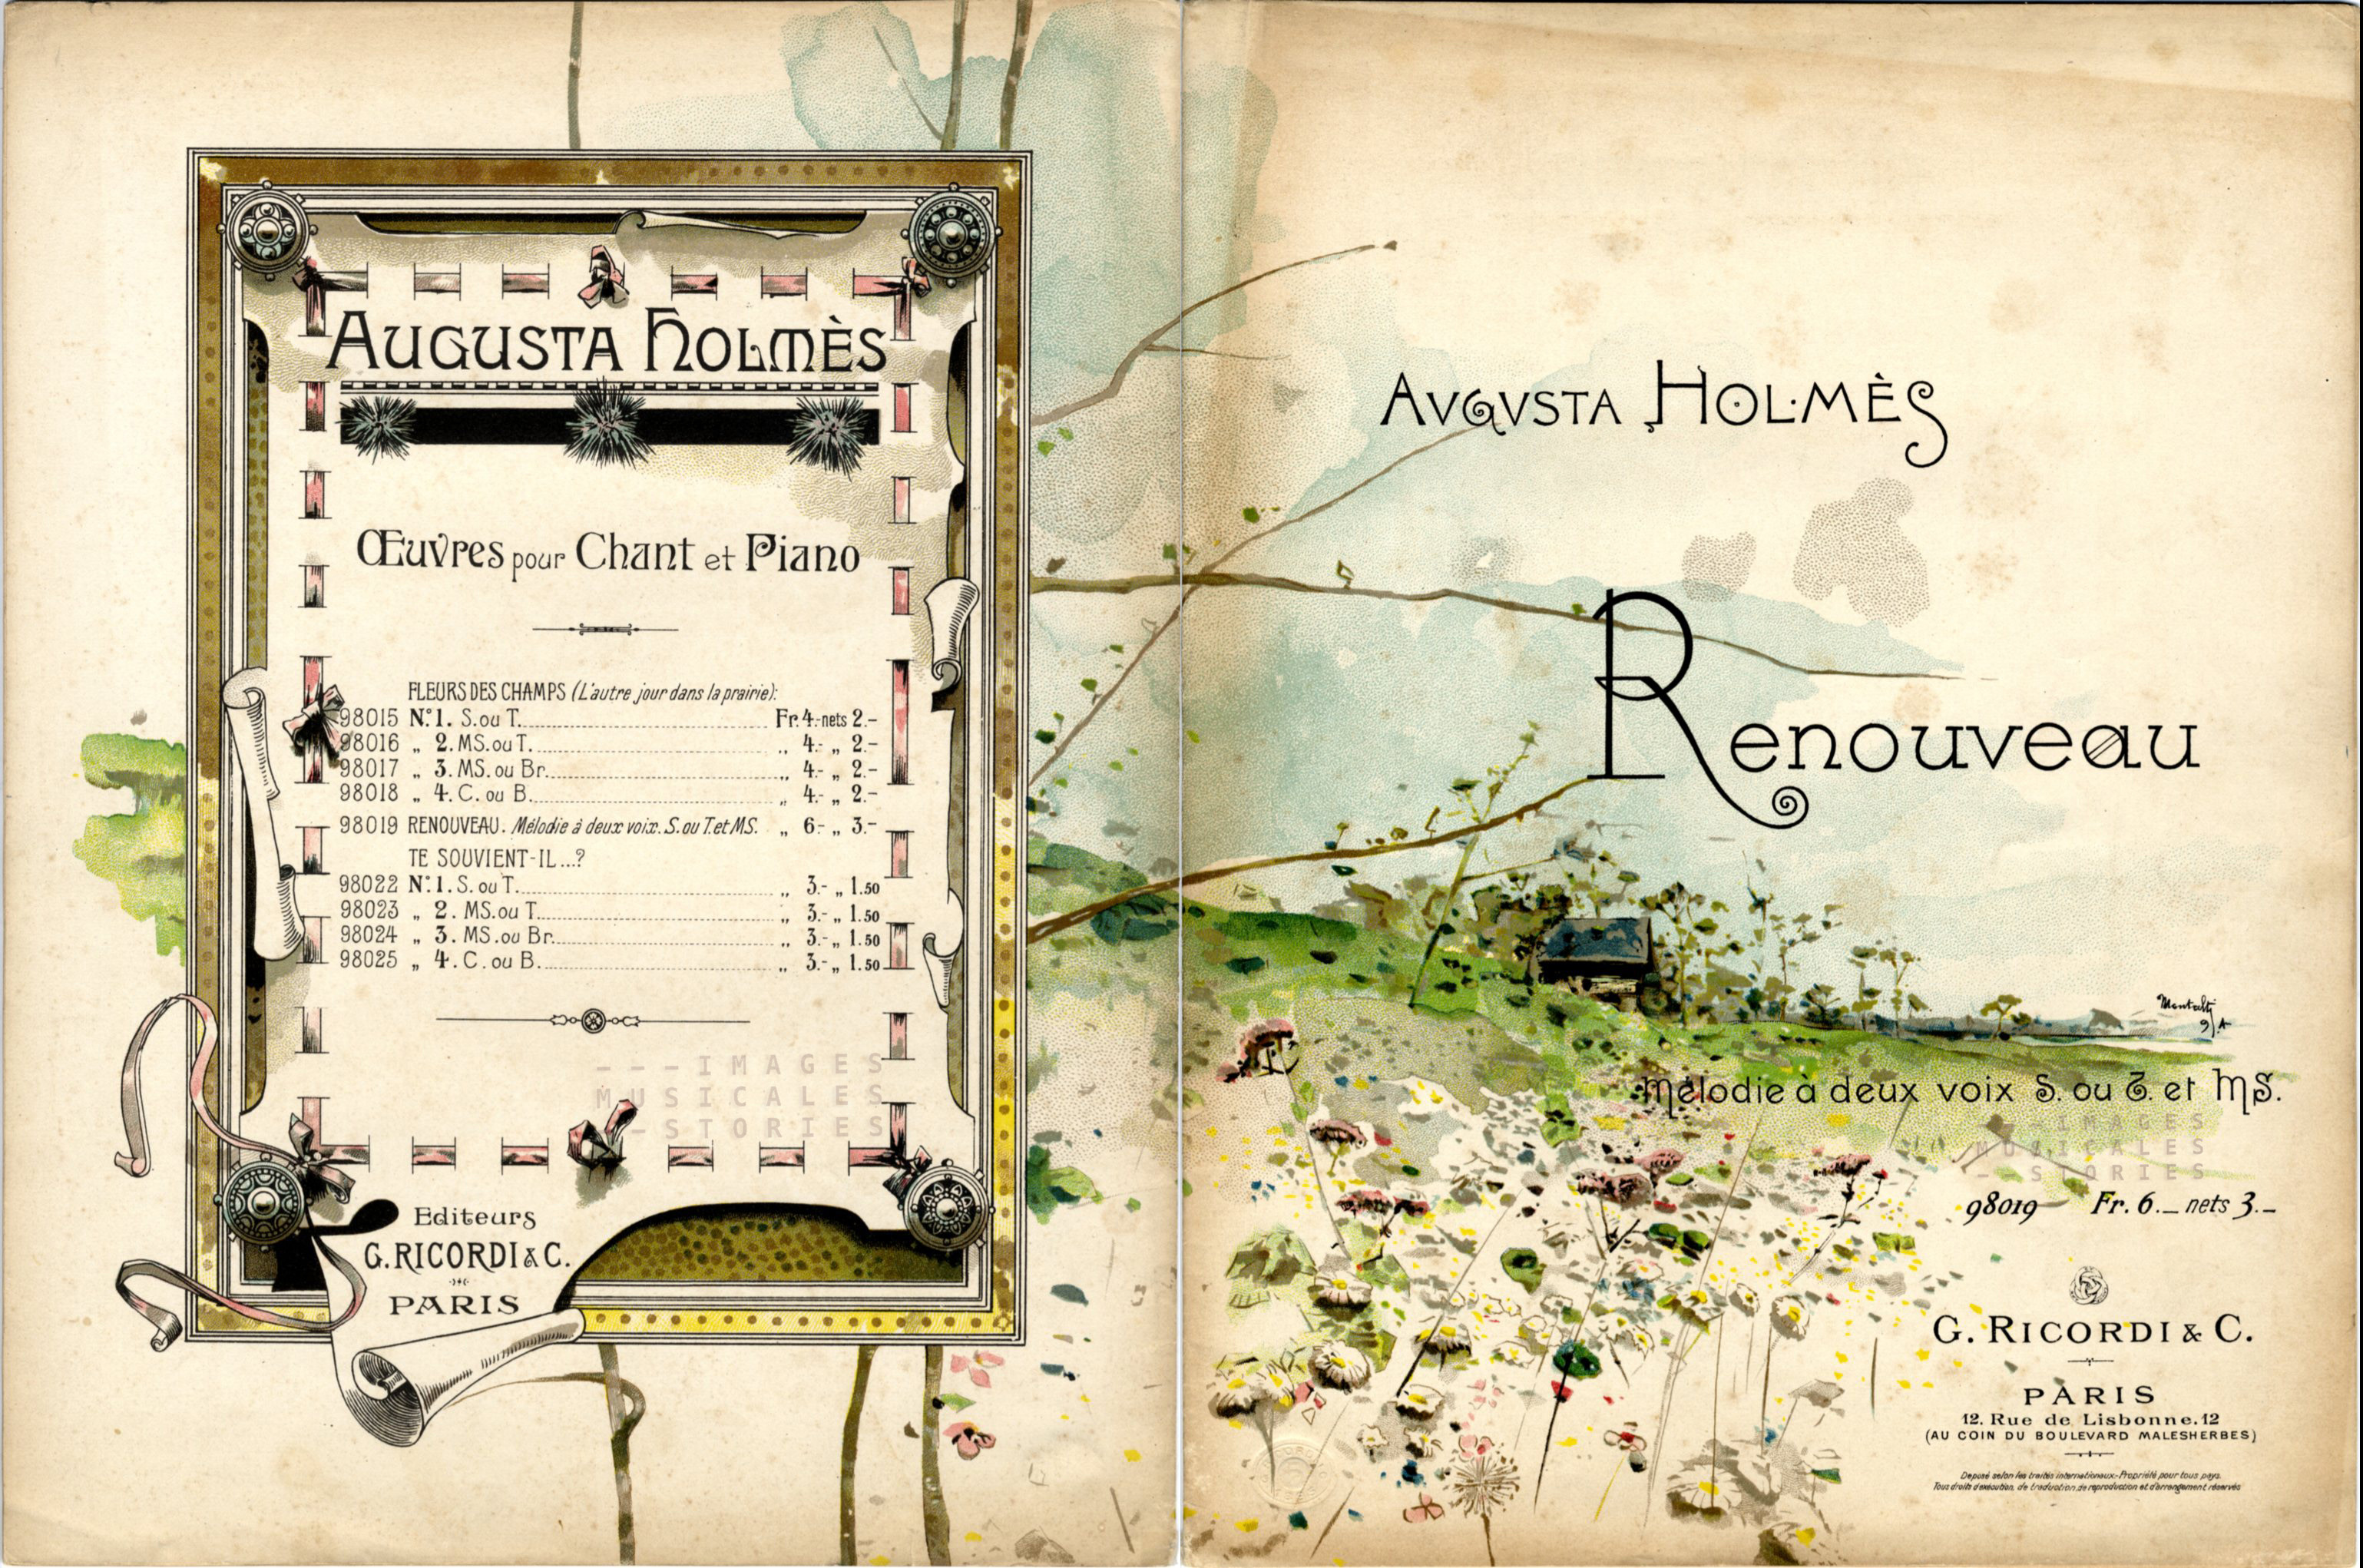 'Renouveau', composed by Augusta Holmes